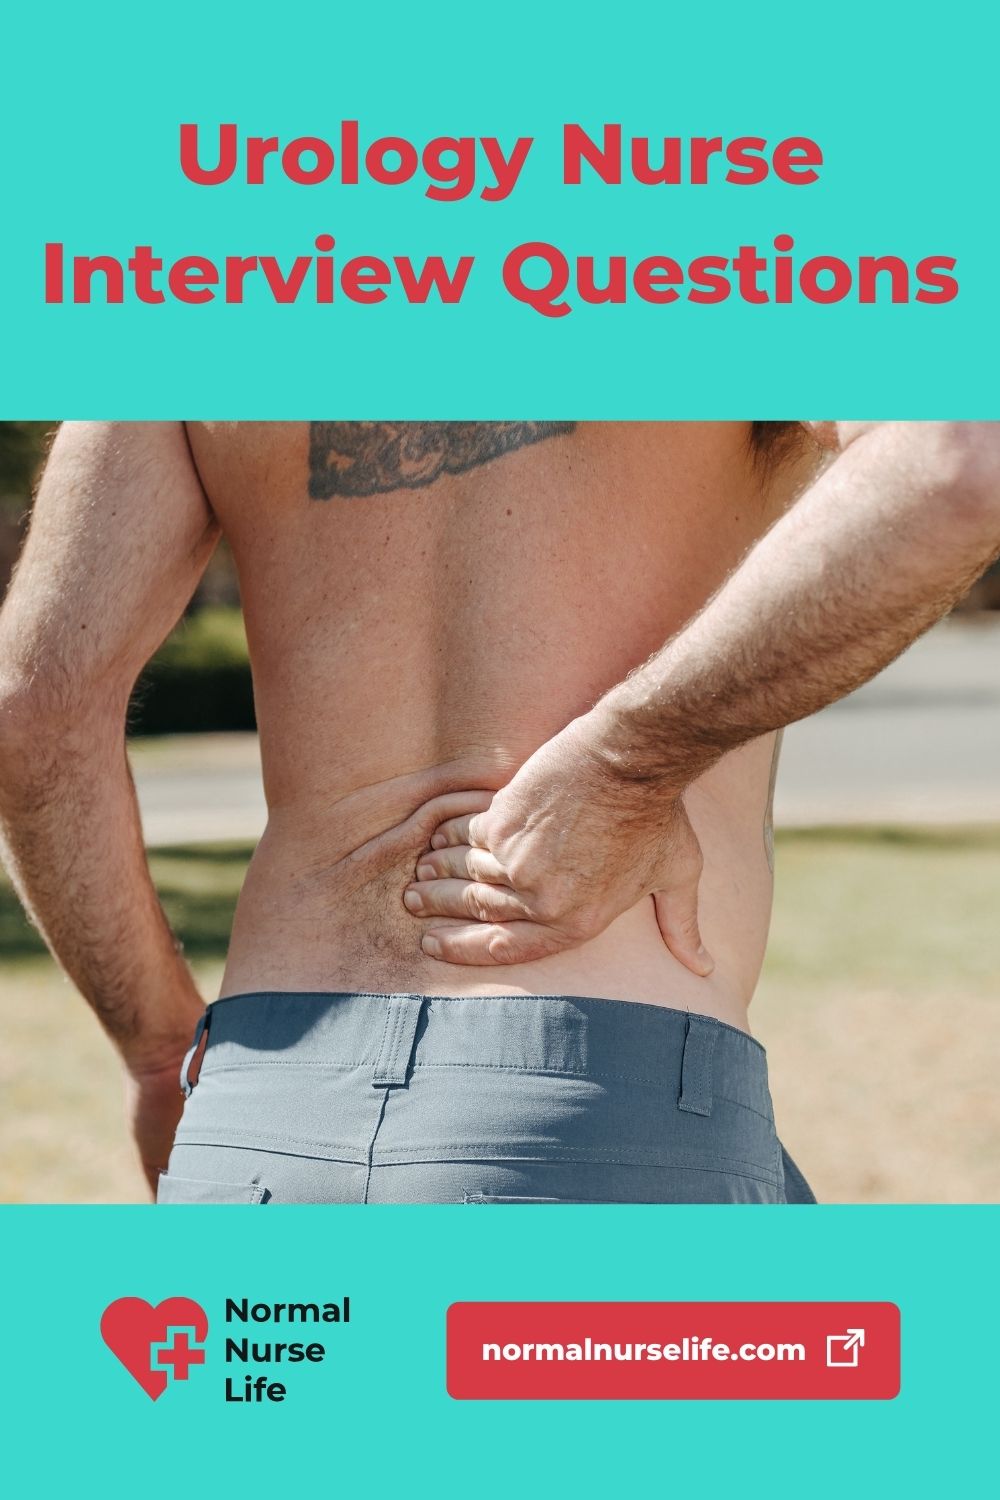 Interview questions for urology nurses